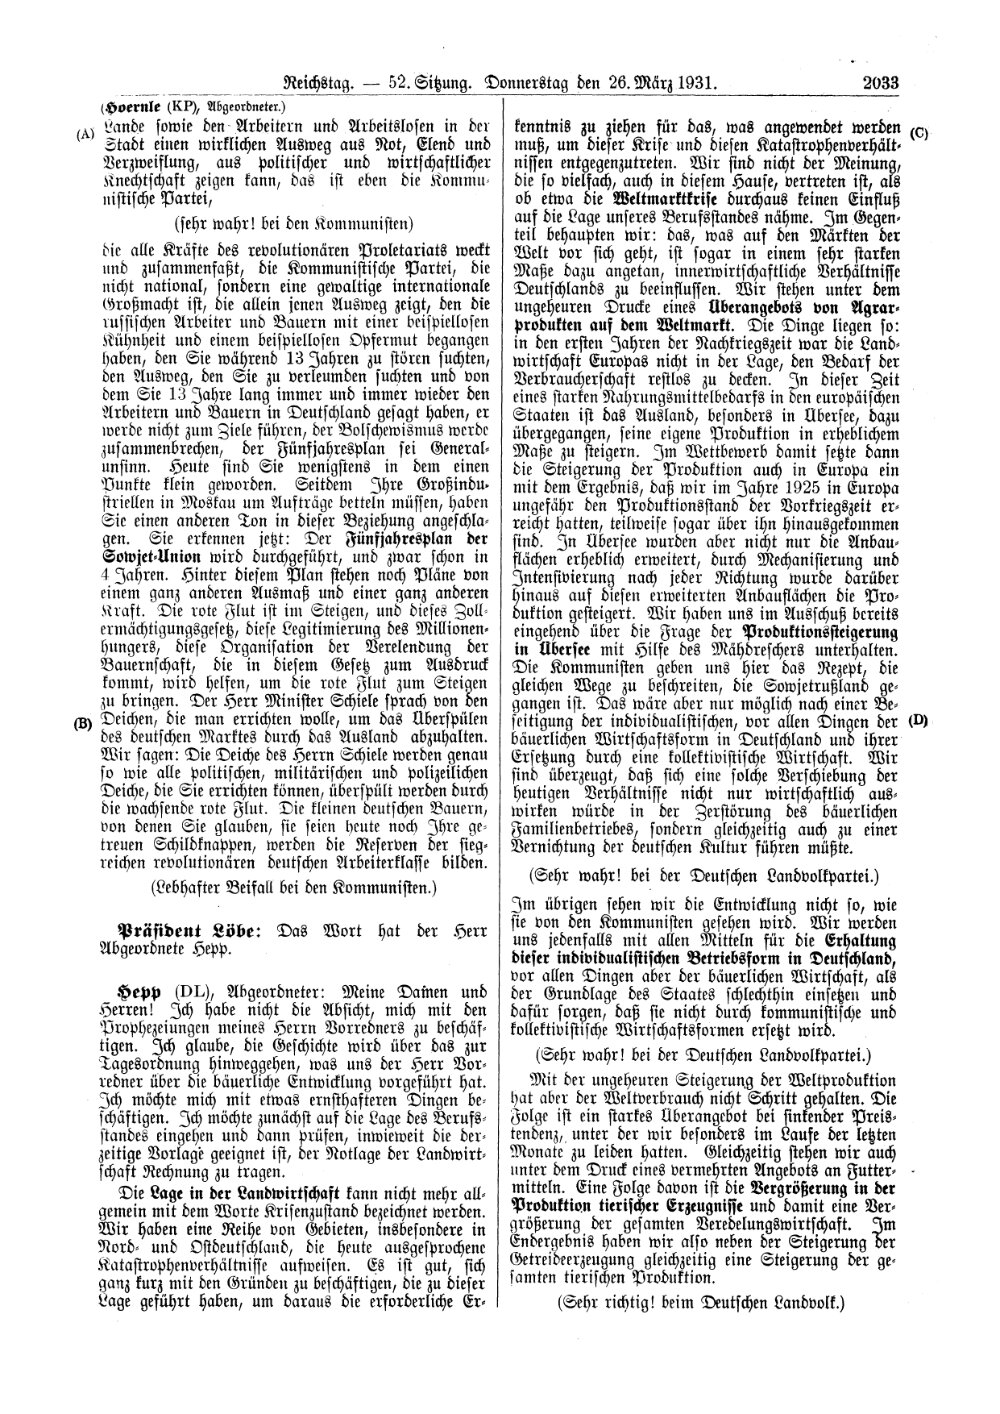 Scan of page 2033